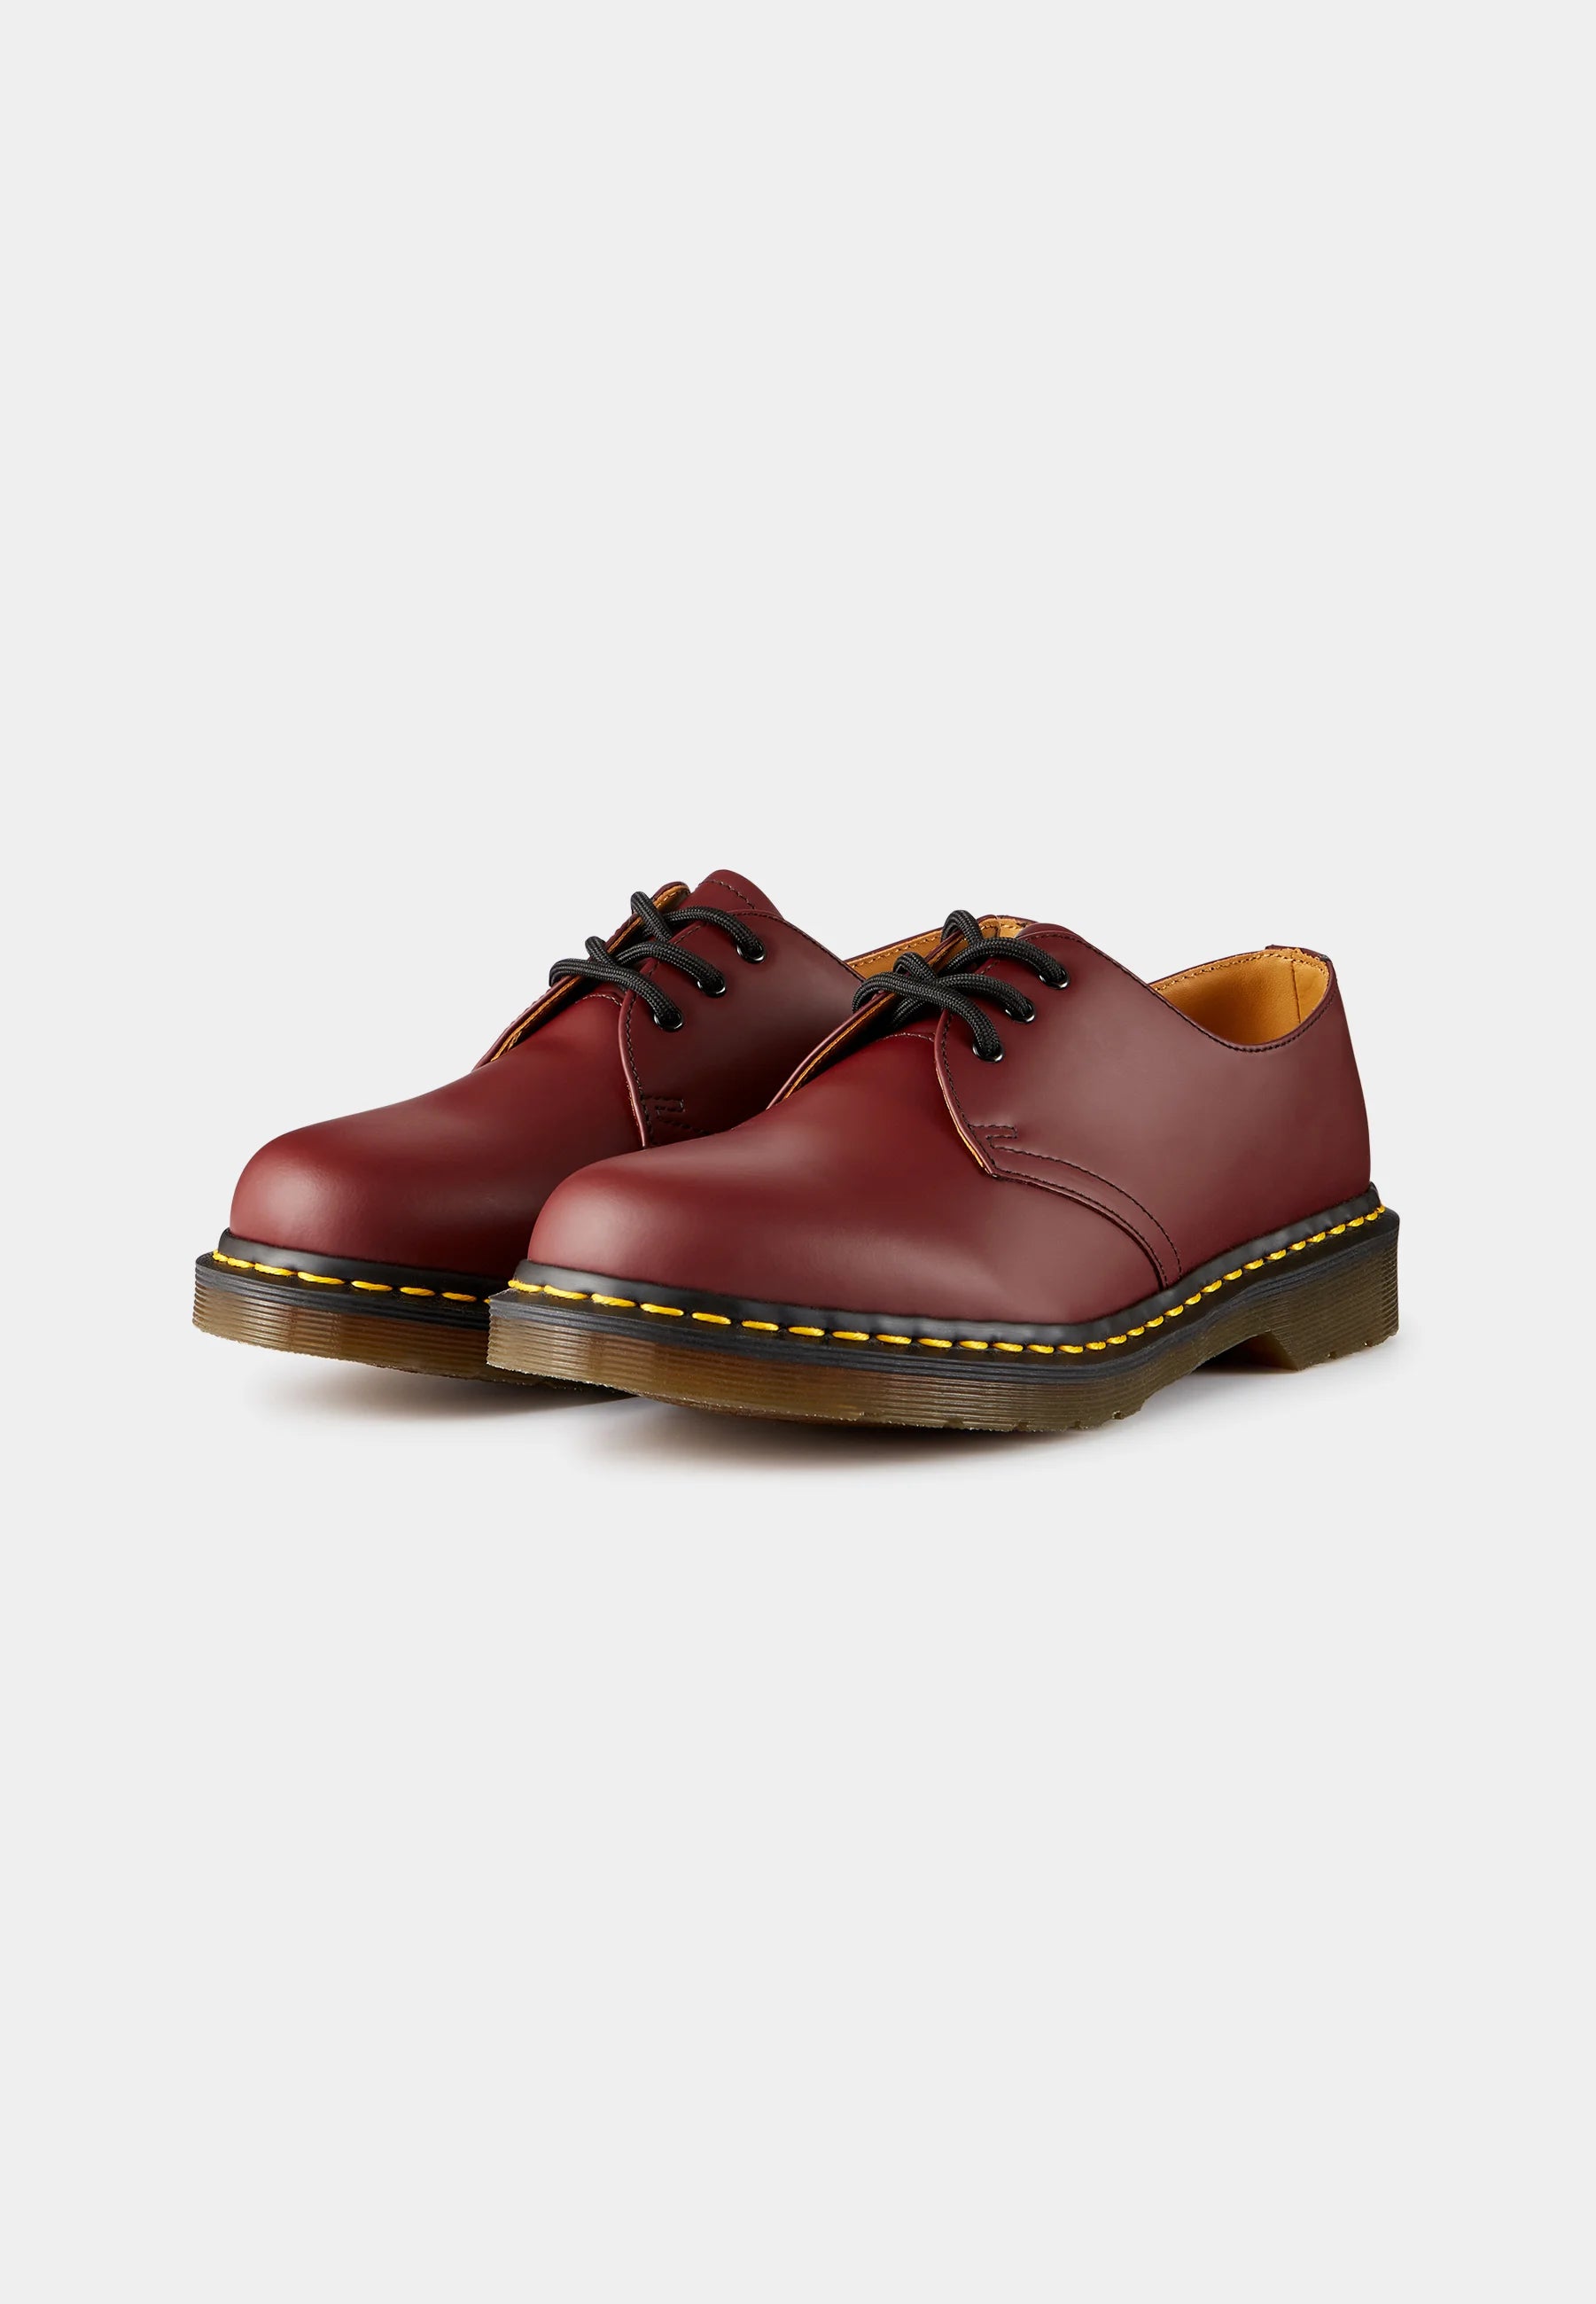 Dr. Martens 1461 Cherry Red Oxford Shoes – Thebootcha